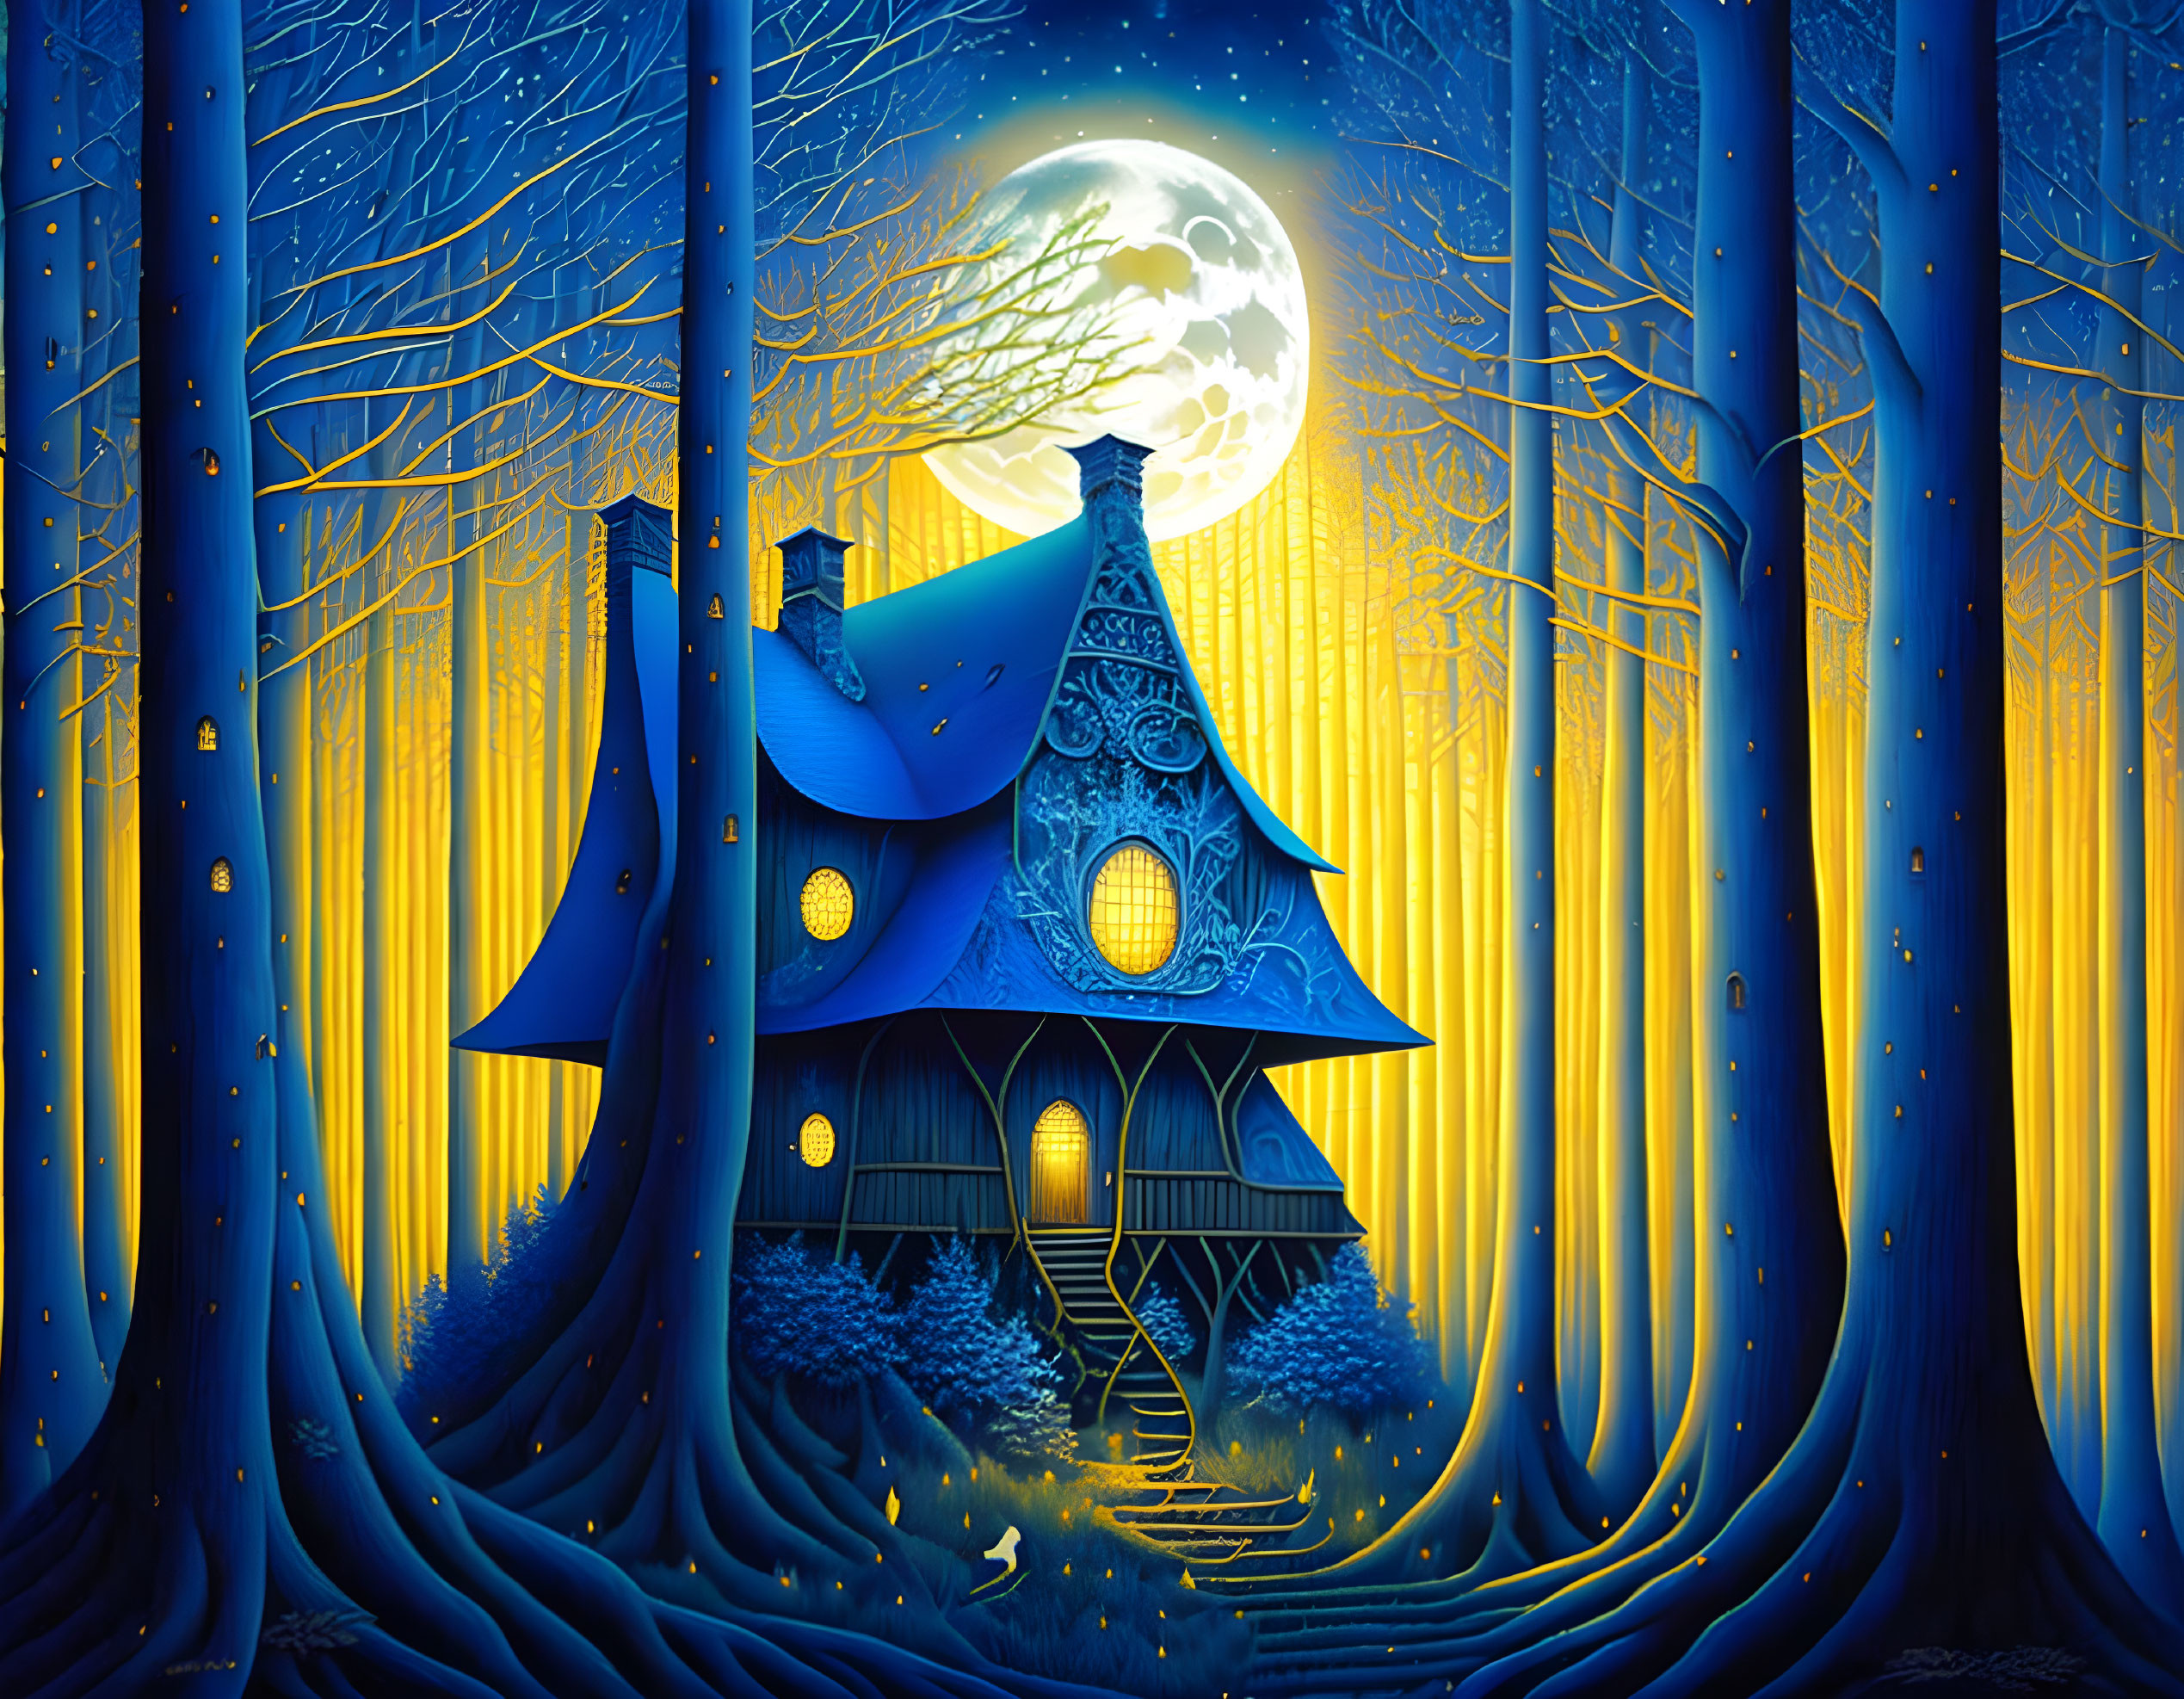 Enchanting blue house in mystical forest under full moon